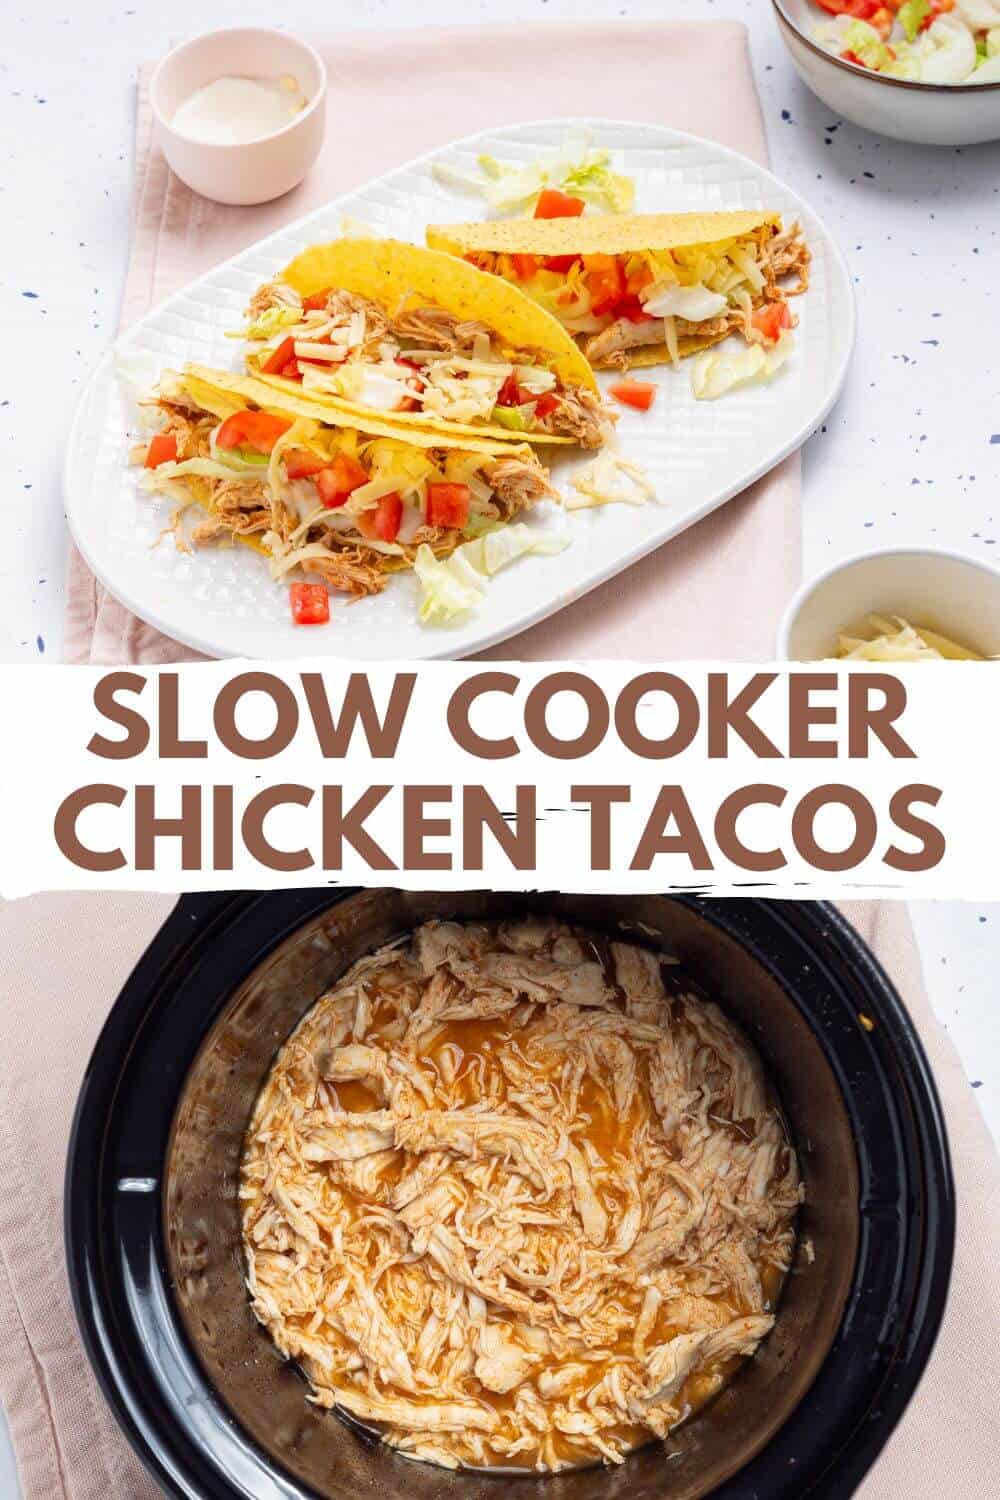 Slow cooker chicken tacos in the slow cooker.